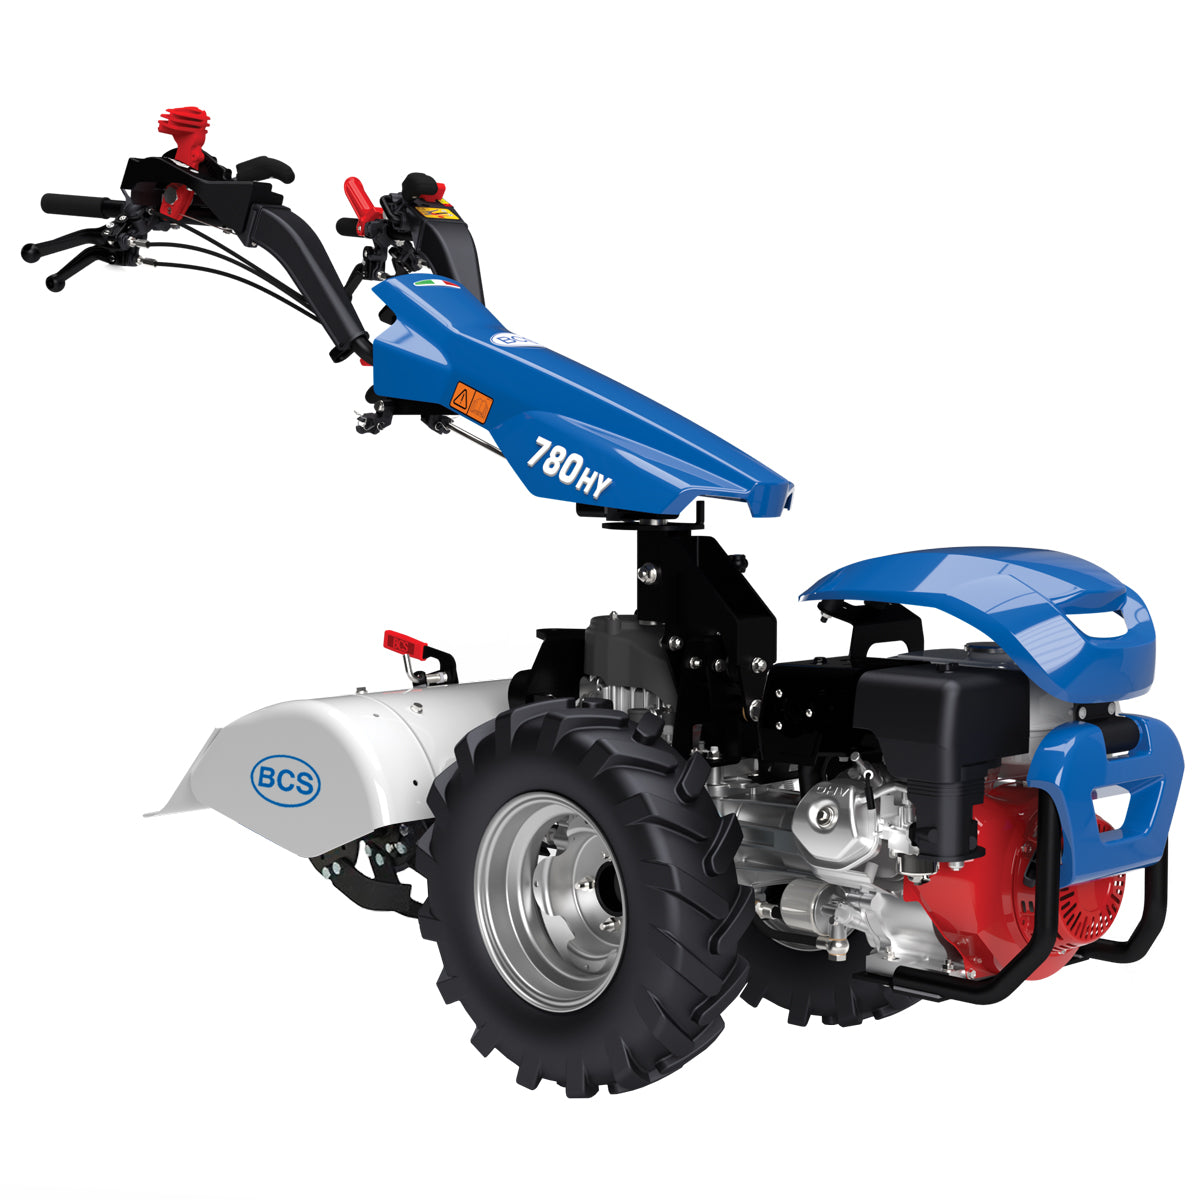 BCS 780HY Two Wheel Tractor